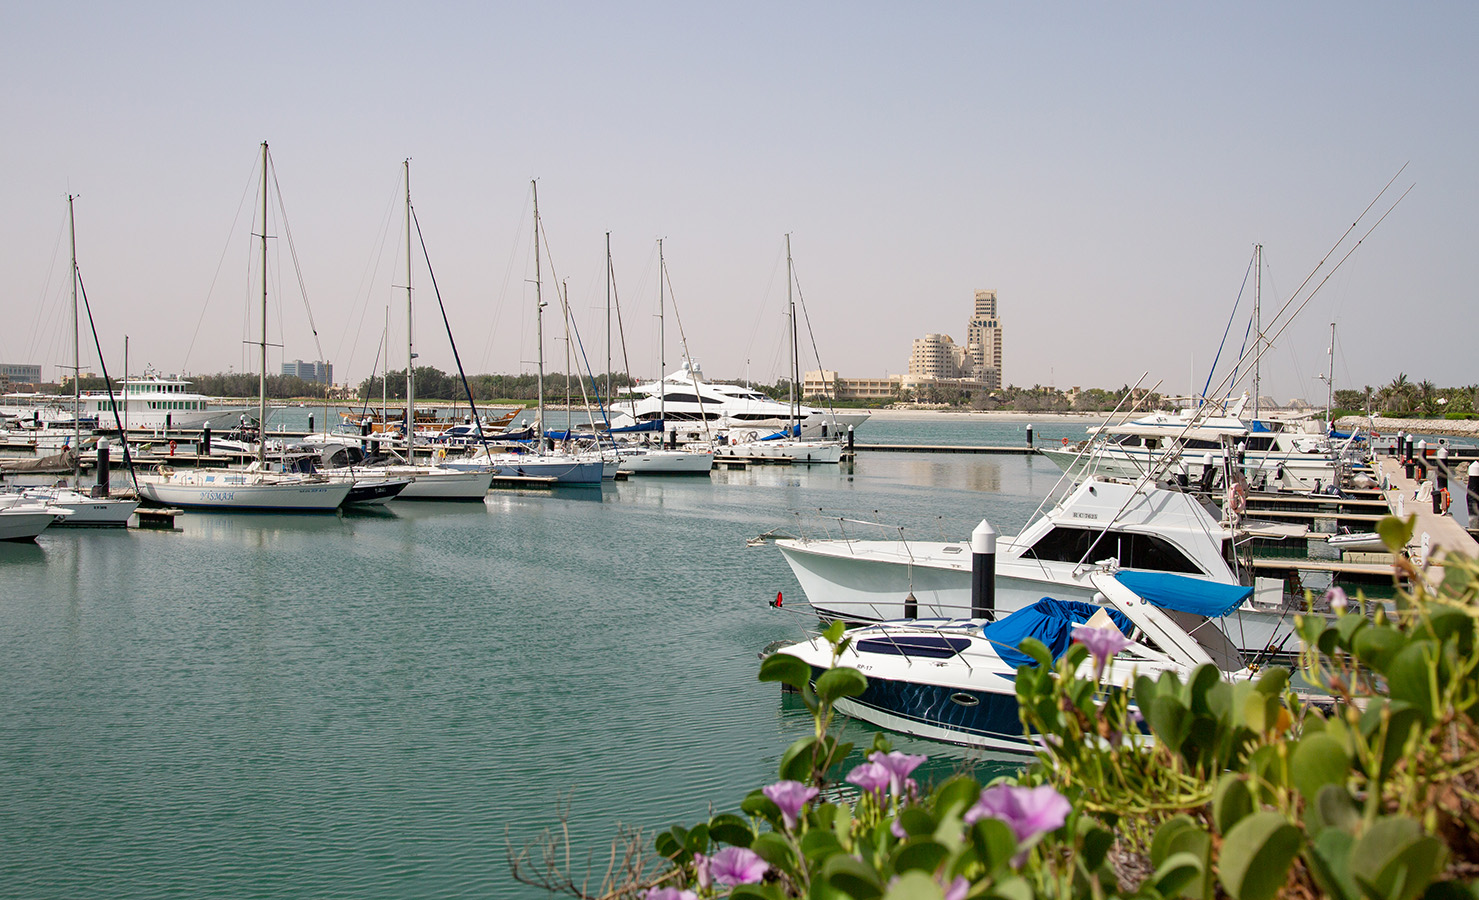 View of Royal Yacht Club in Ras Al Khaimah with a stunning display of various yachts moored in the serene harbor.